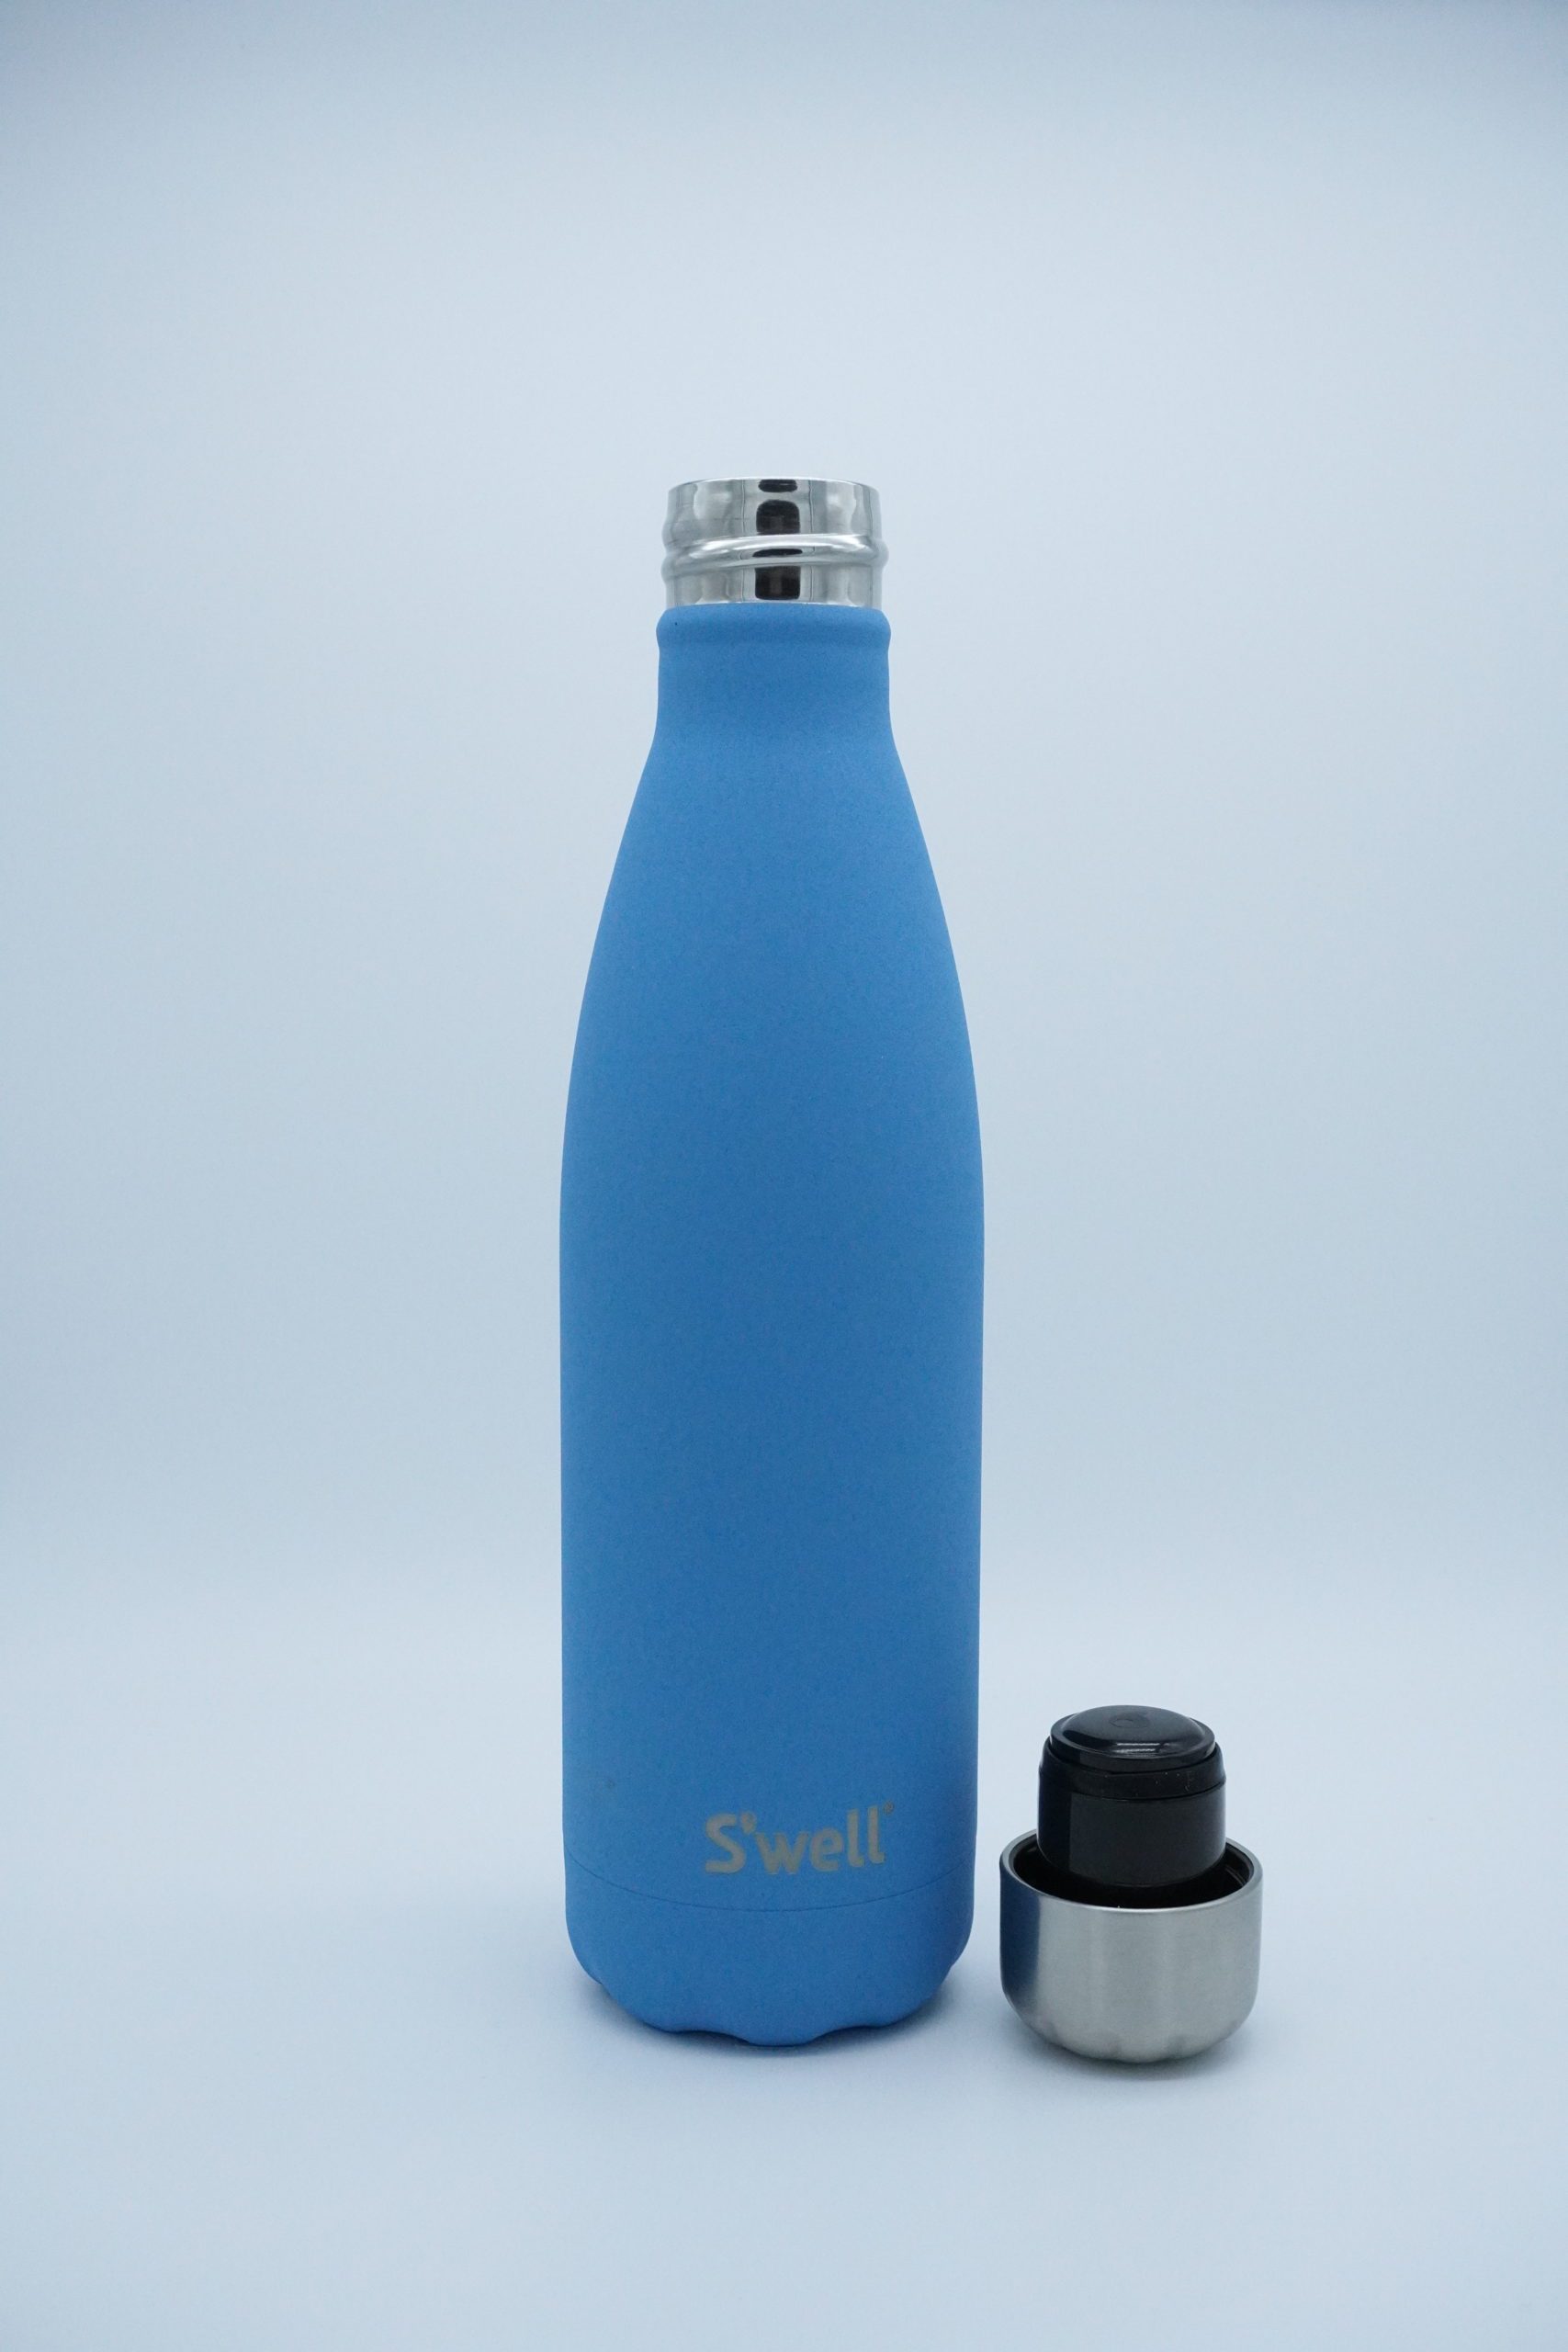 S'well (swell) Bottle Classic 500ml Thermos Reviews